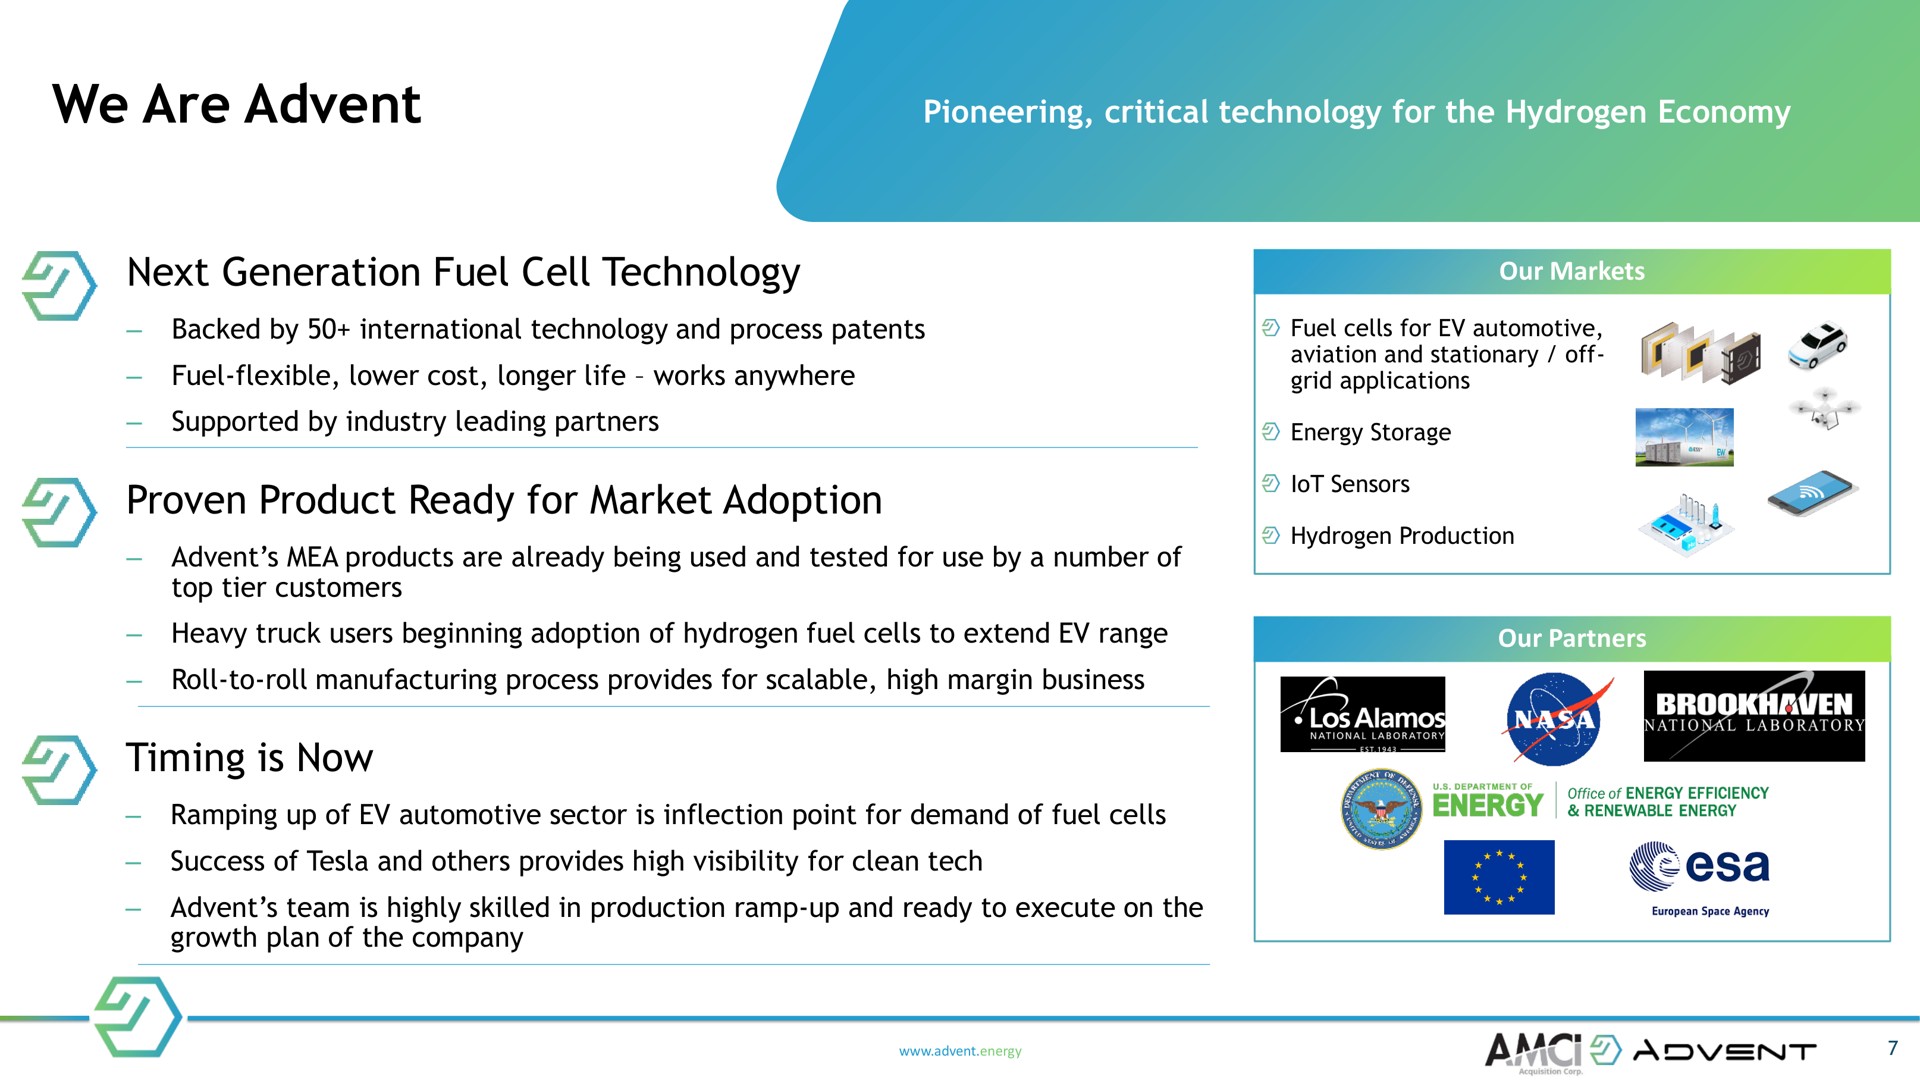 we are next generation fuel cell technology proven product ready for market adoption timing is now pioneering critical the hydrogen economy backed by international and process patents fuel flexible lower cost longer life works anywhere supported by industry leading partners products already being used and tested use by a number of top tier customers our markets cells automotive aviation and stationary off grid applications energy storage lot sensors hydrogen production heavy truck users beginning of hydrogen cells to extend range our partners roll to roll manufacturing process provides scalable high margin business ramping up of automotive sector inflection point demand of cells success of and provides high visibility clean tech team highly skilled in production ramp up and to execute on the growth plan of the company energy national laboratory office of energy efficiency energy renewable energy at space agency | Advent